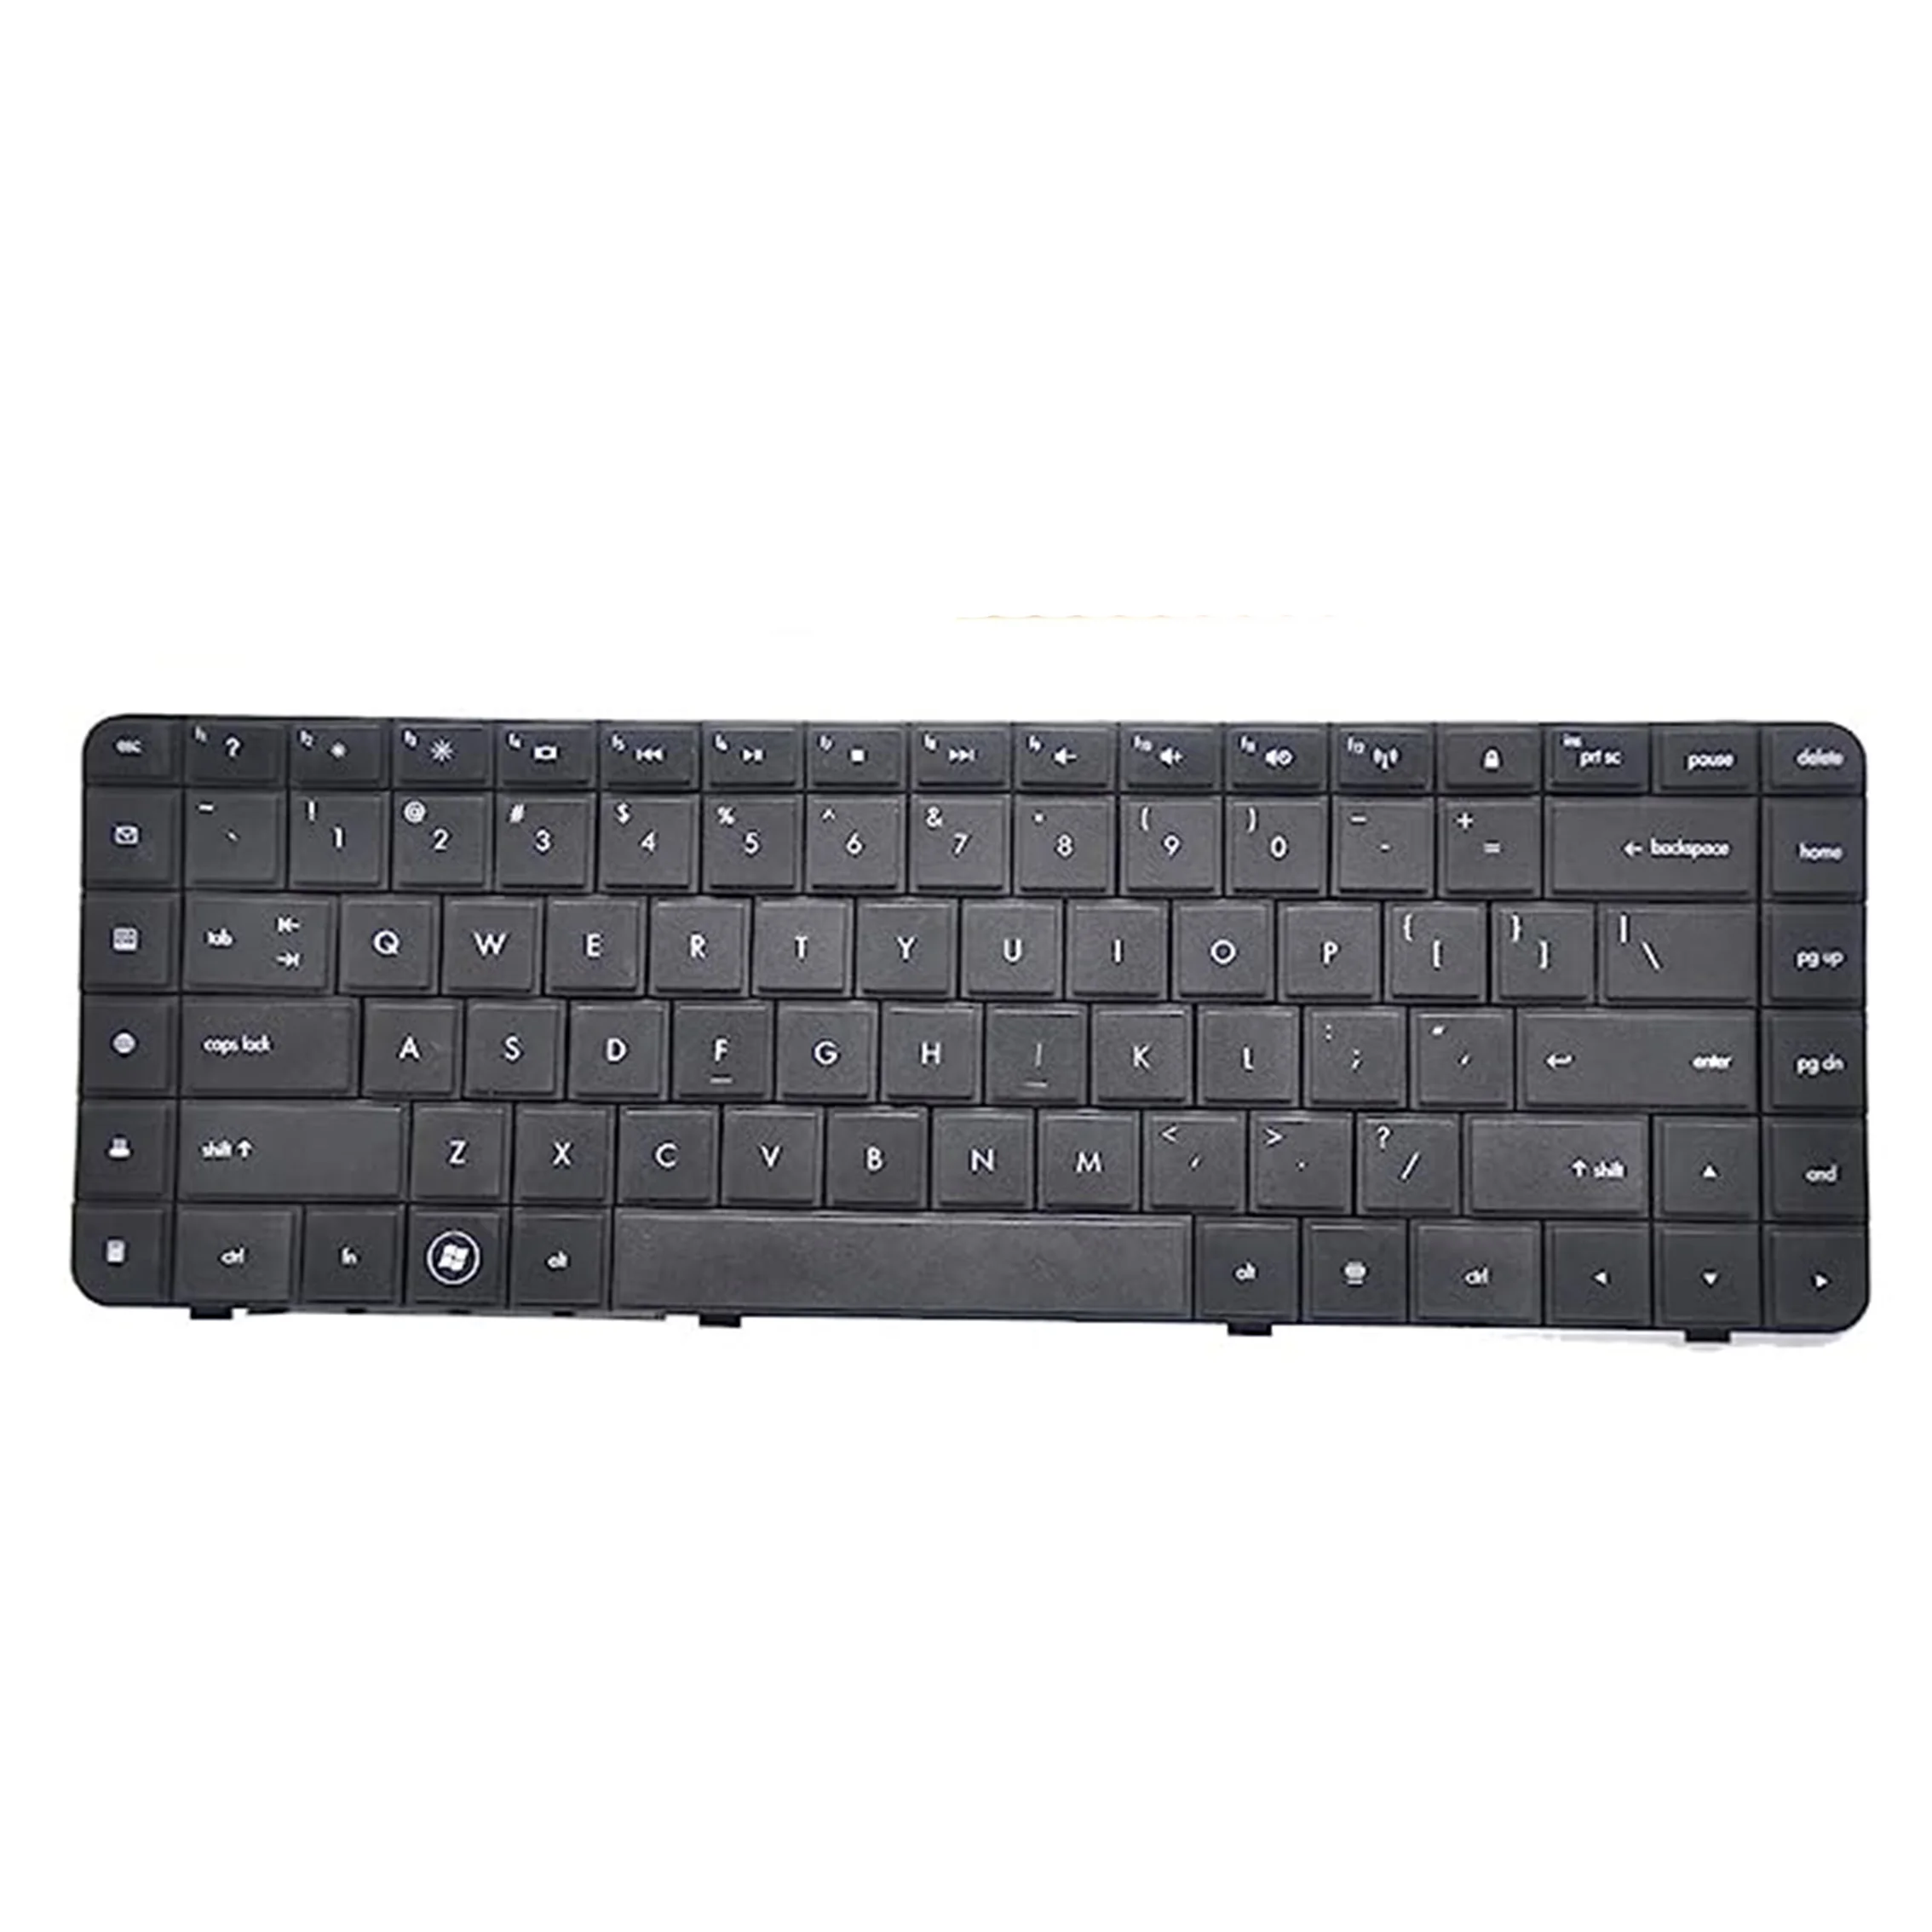 

Replacement Keyboard with Ribbon Cable Compatible for HP Compaq Presario CQ62 G62 G56 CQ56 Series US Layout